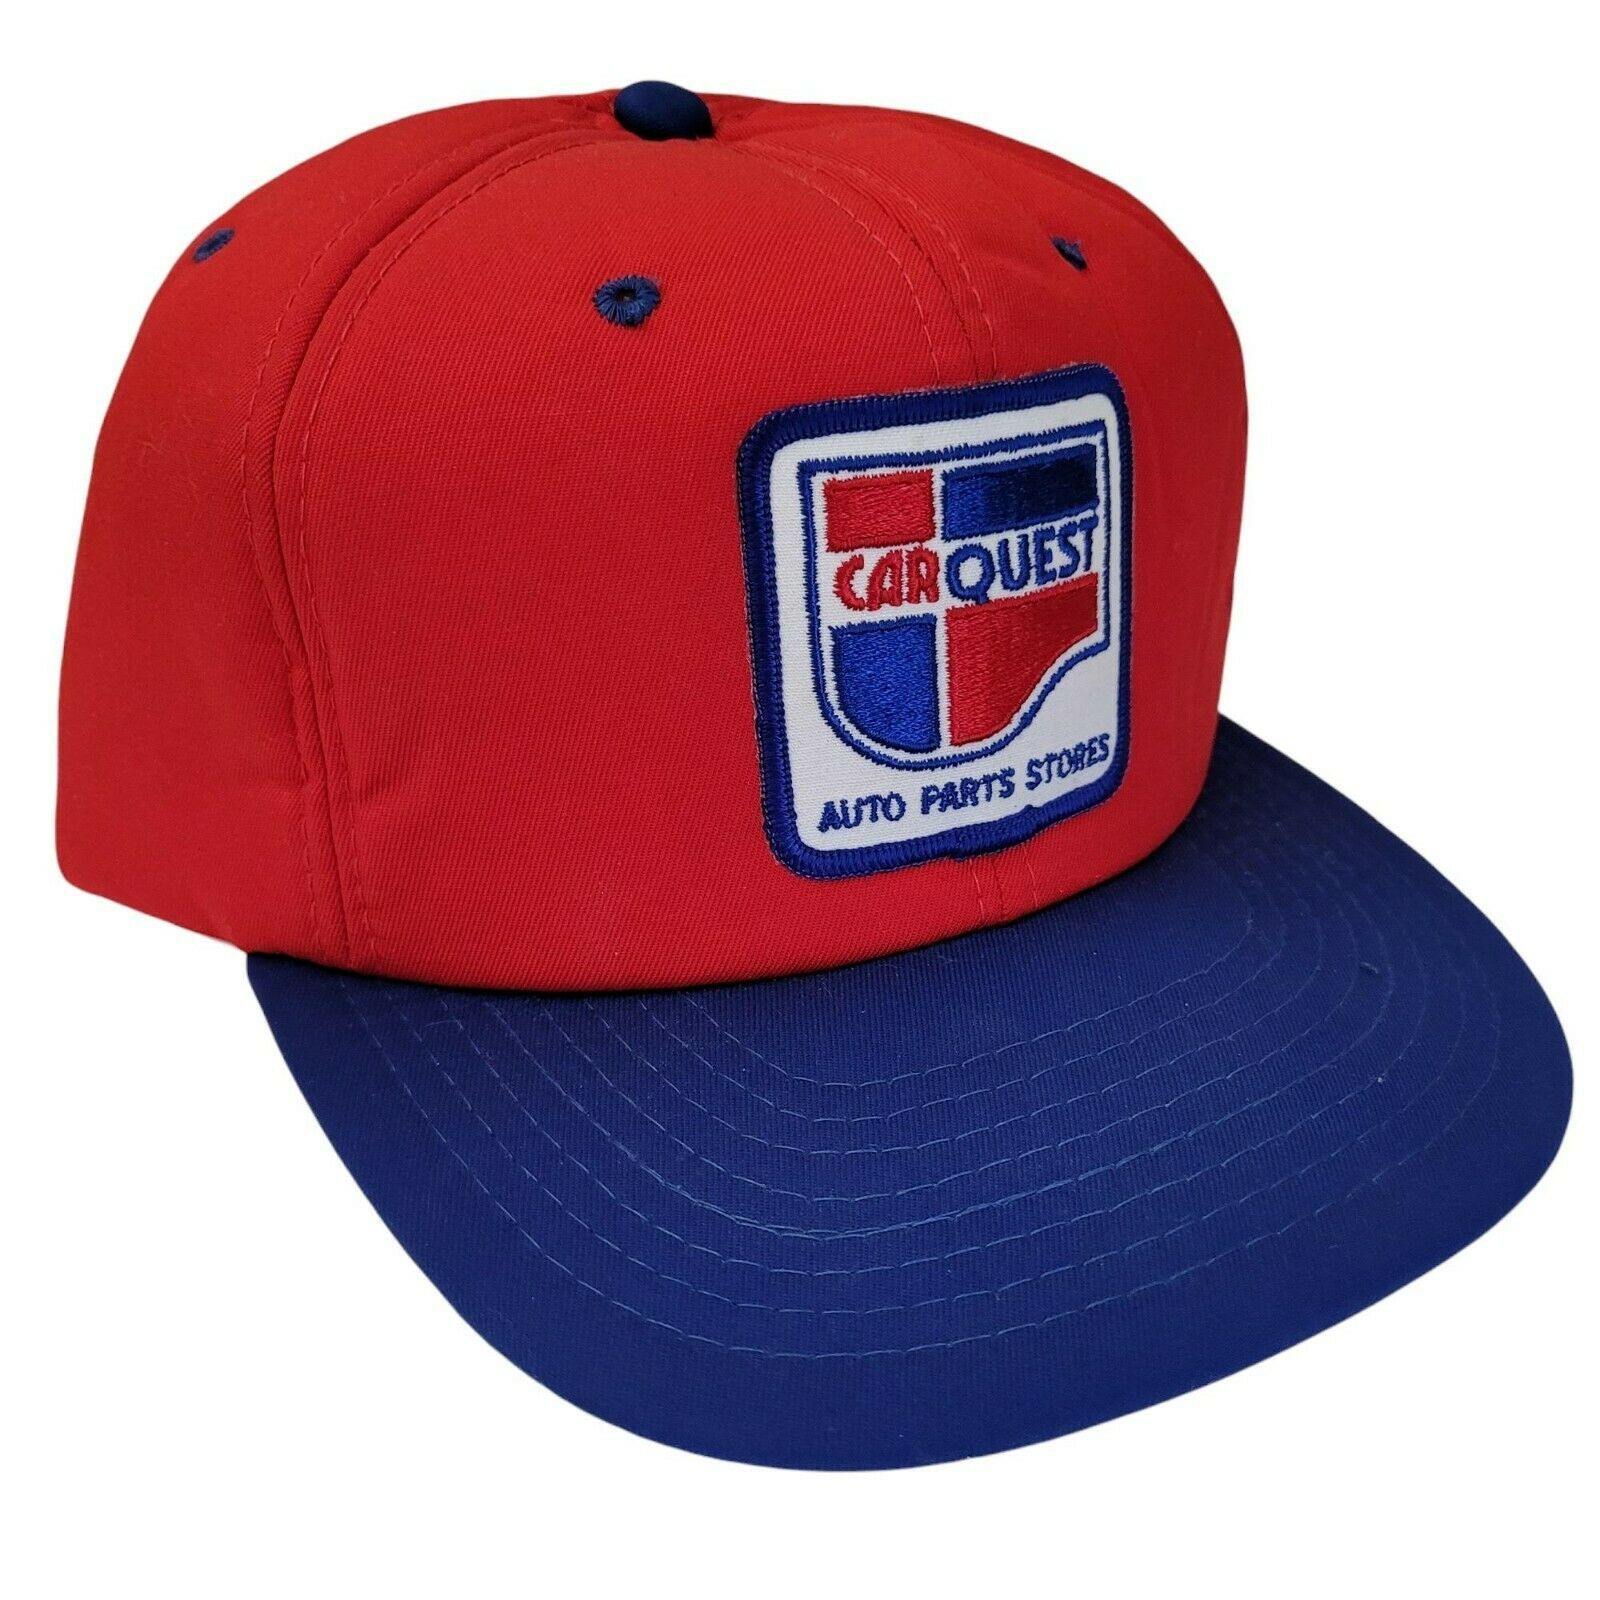 Primary image for Vintage CarQuest Auto Parts Store Snapback NFL Official Sports Specialties Red